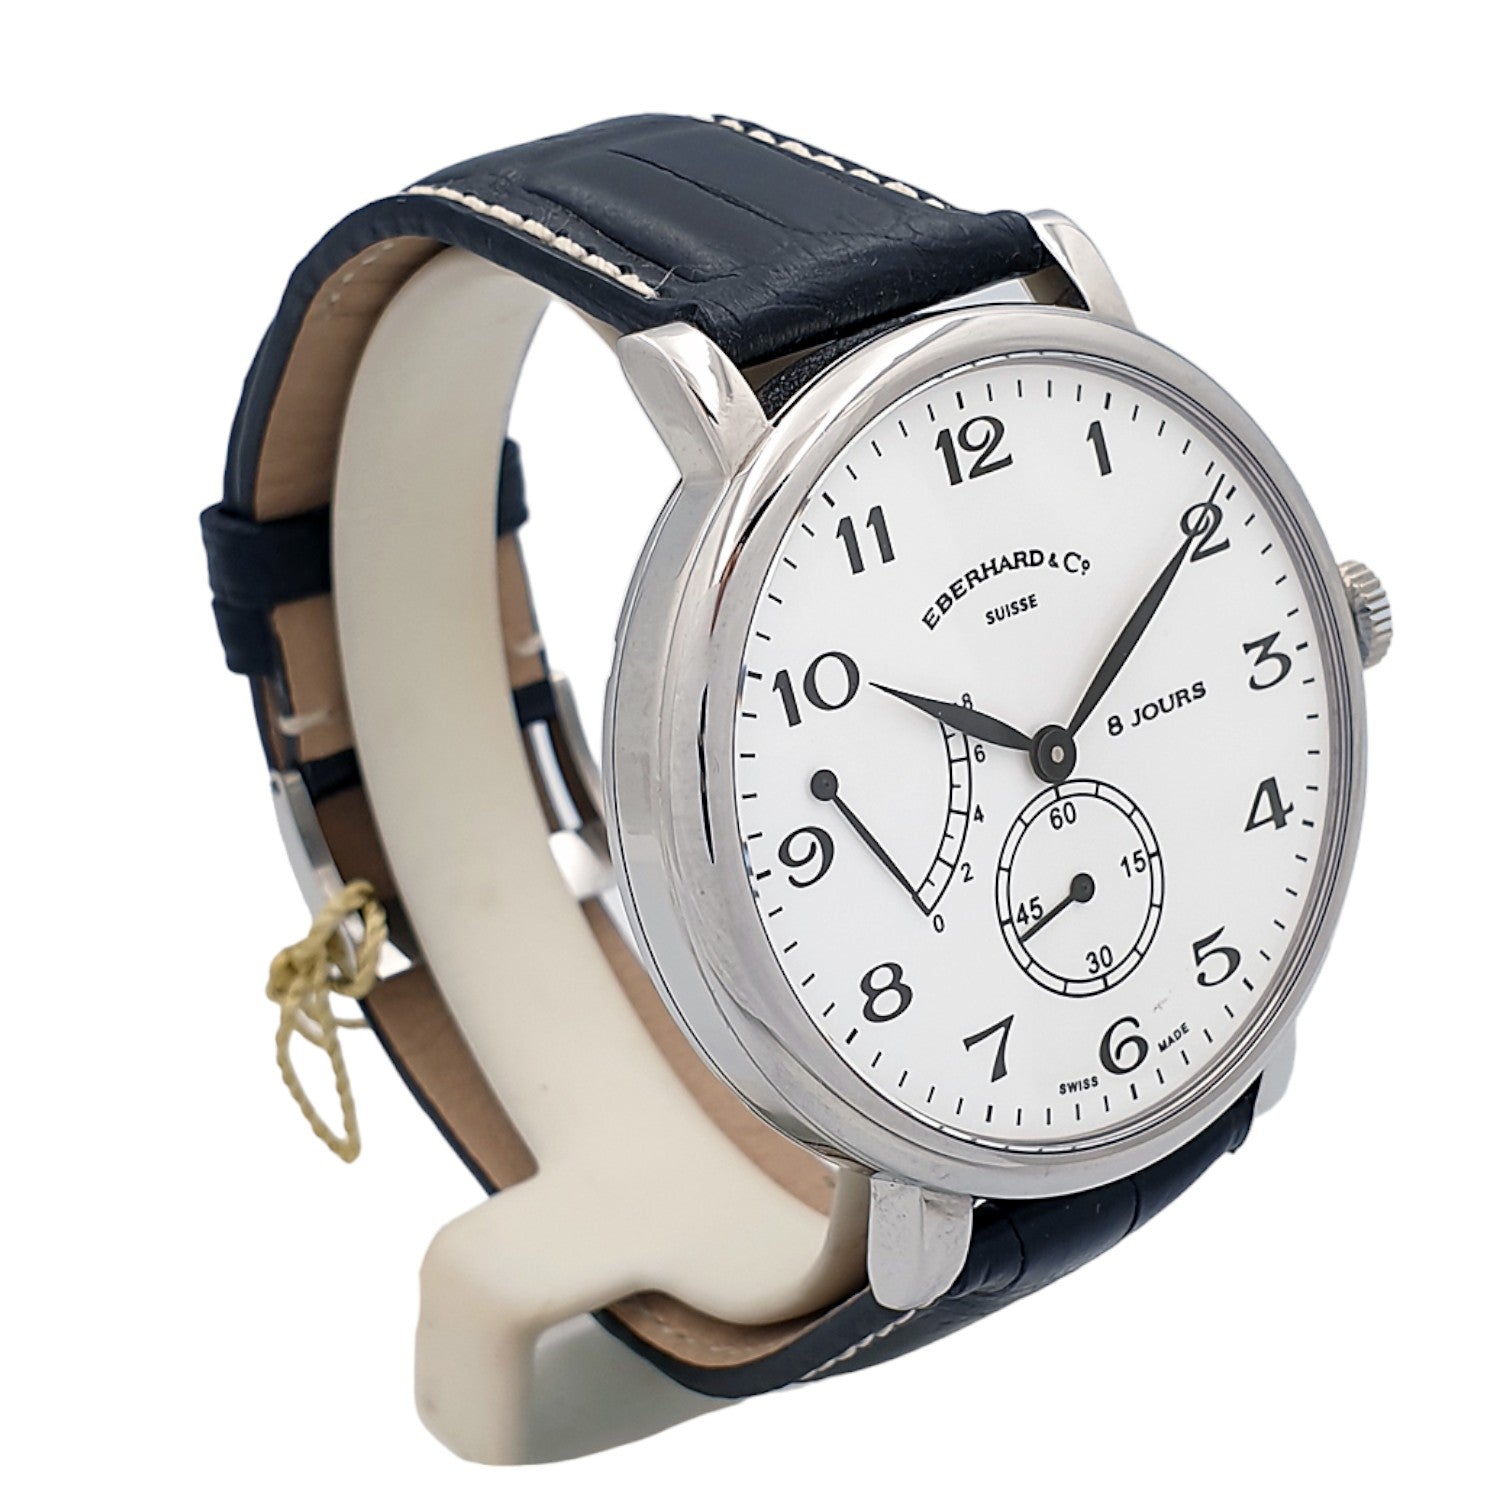 Eberhard & Co. 8 Jours Grande Taille Ref. 21027CP - ON2417